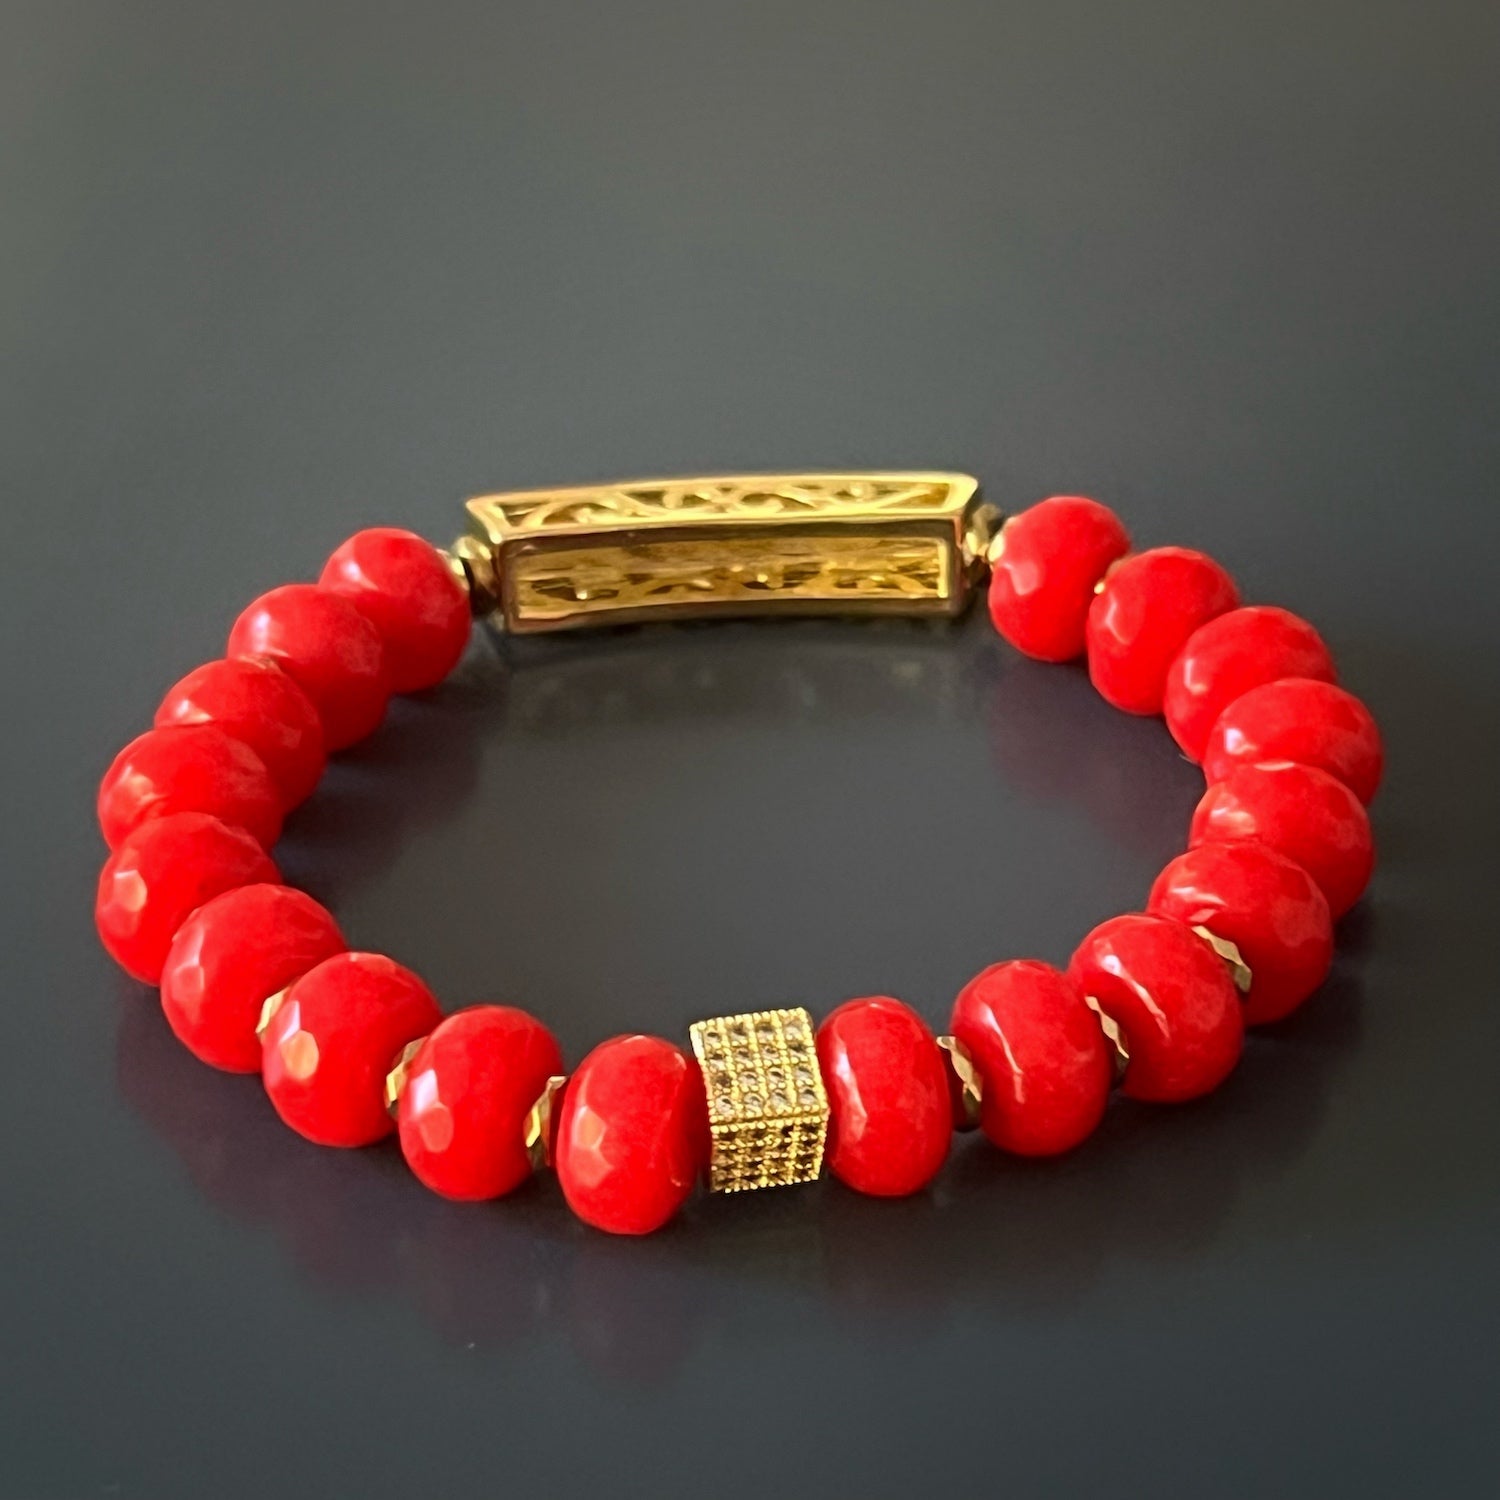 Embrace the symbolism of protection and luck with the Red Energy Evil Eye Bracelet, featuring red coral stones and a gold-plated evil eye charm.